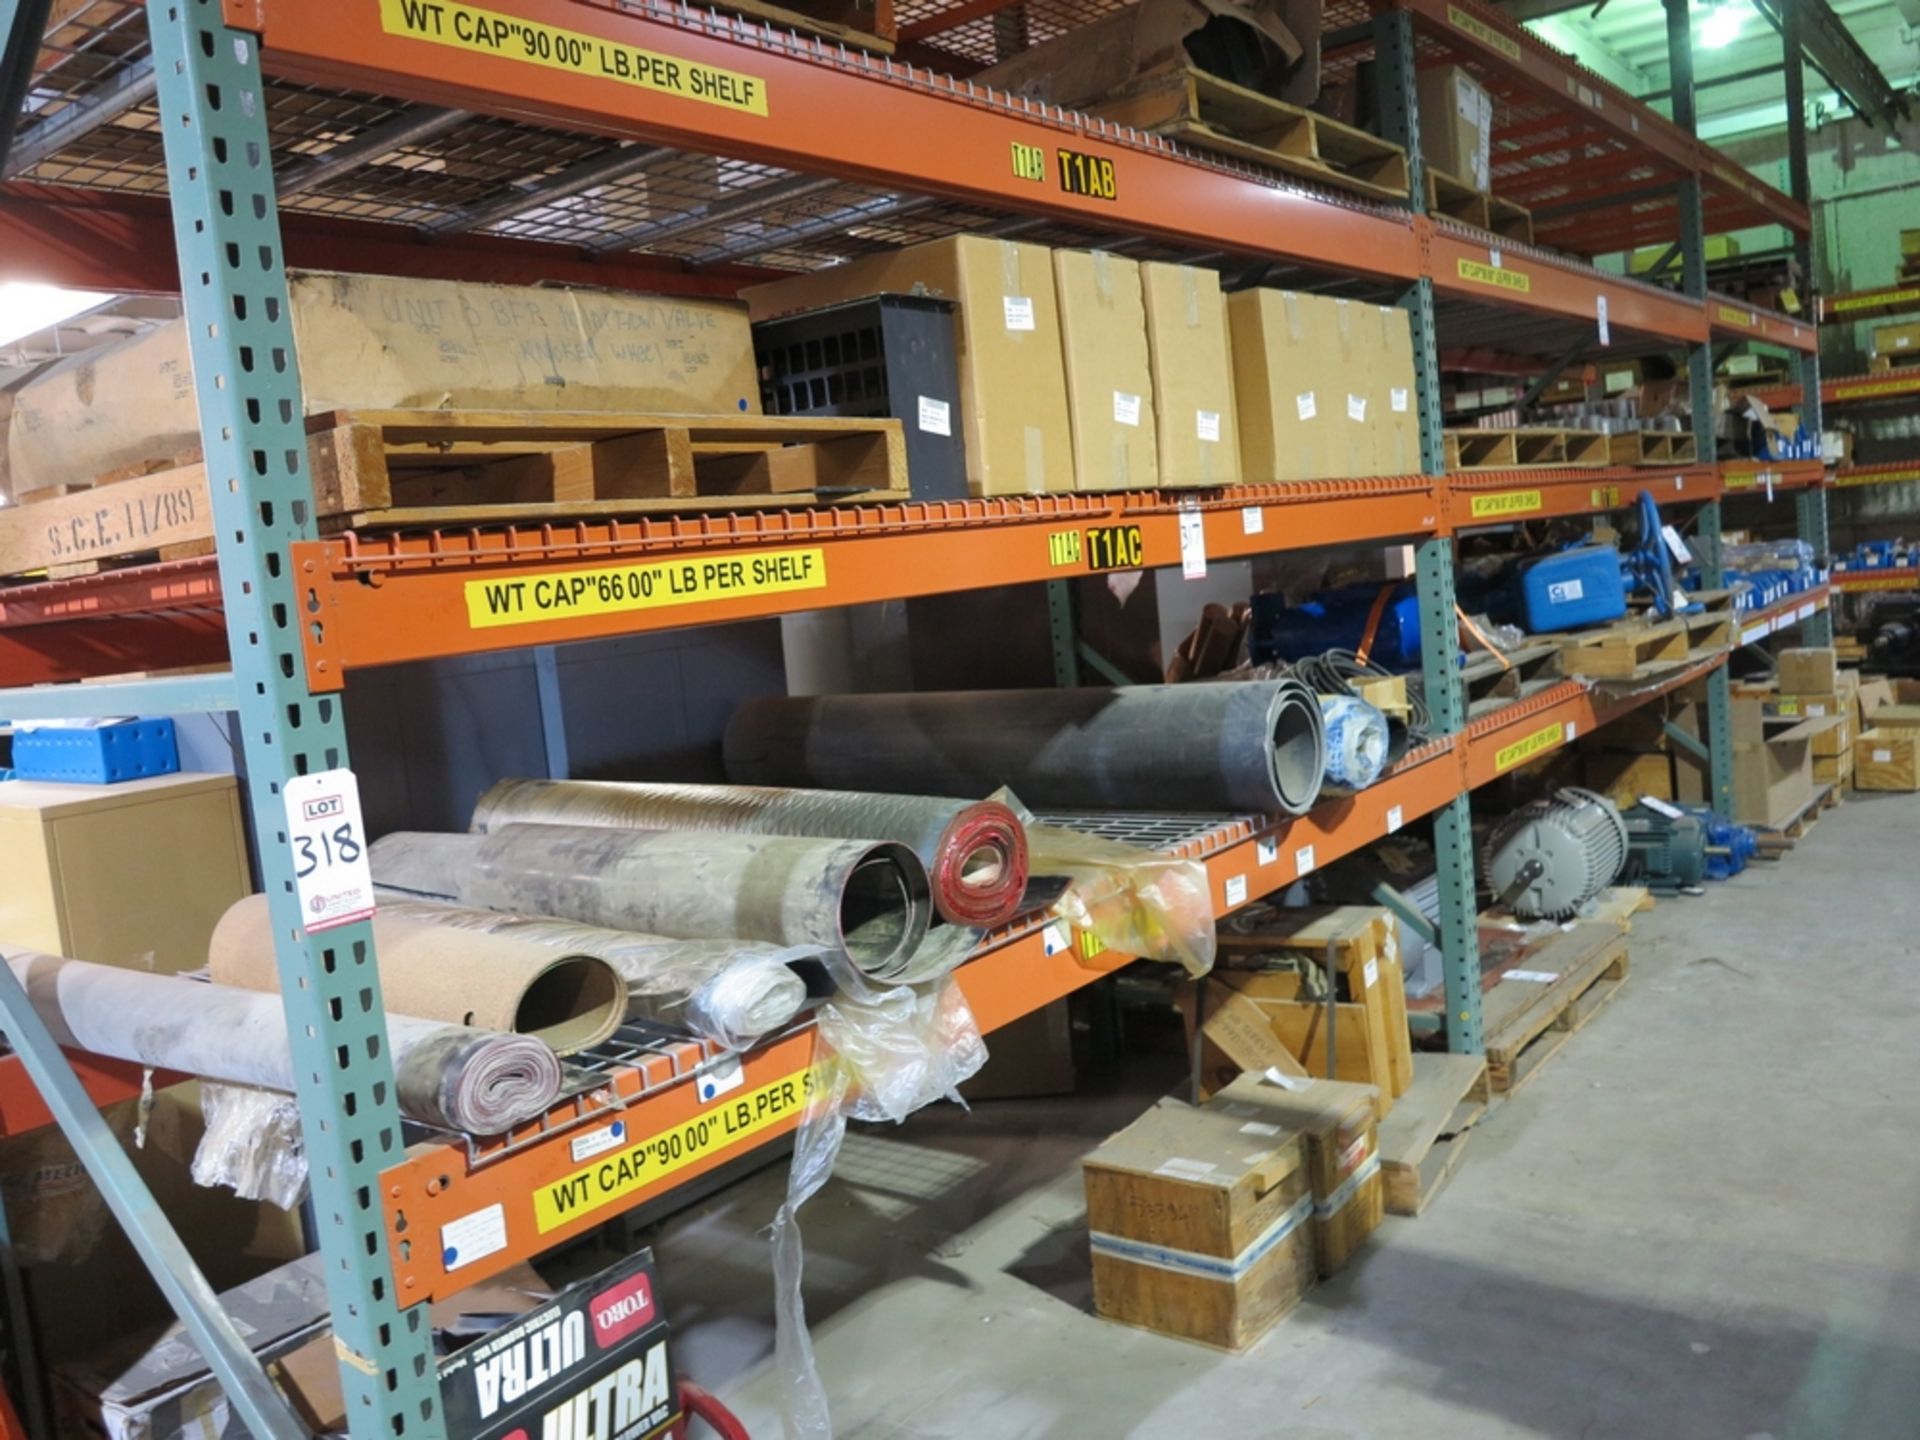 LOT - (3) SECTIONS OF PALLET RACK, WITHOUT CONTENTS; (2) SECTIONS HAVE 10' BEAMS AND (1) SECTION HAS